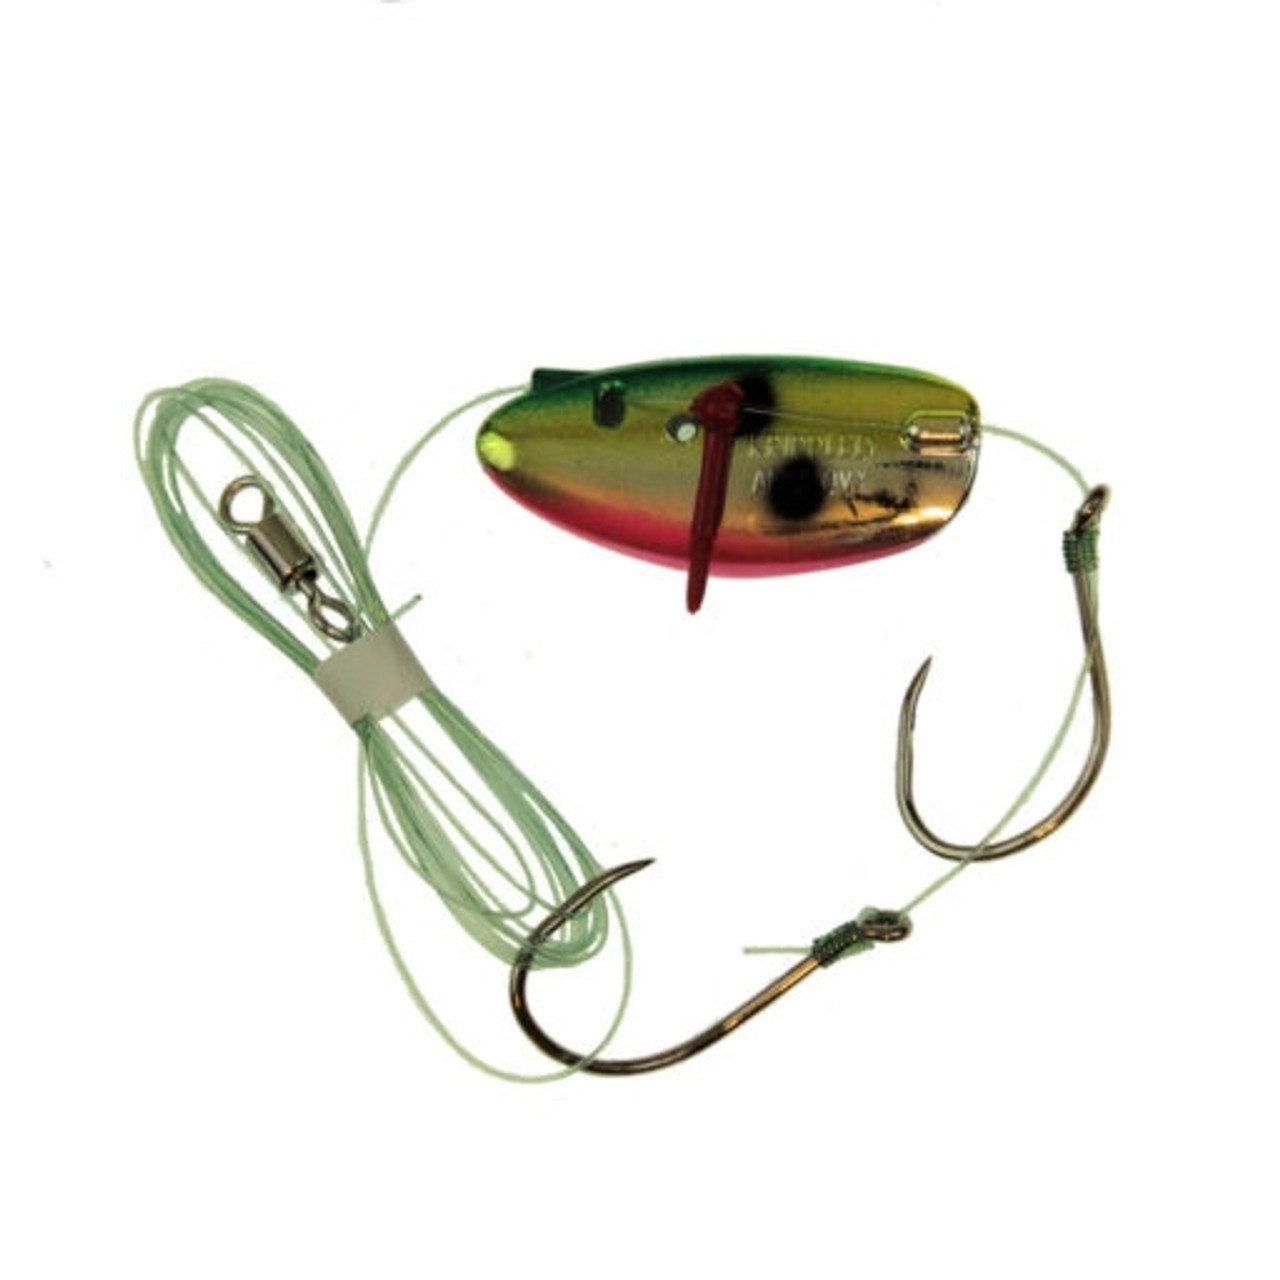 Krippled Anchovy Barbless Tandem Bait Head Rig